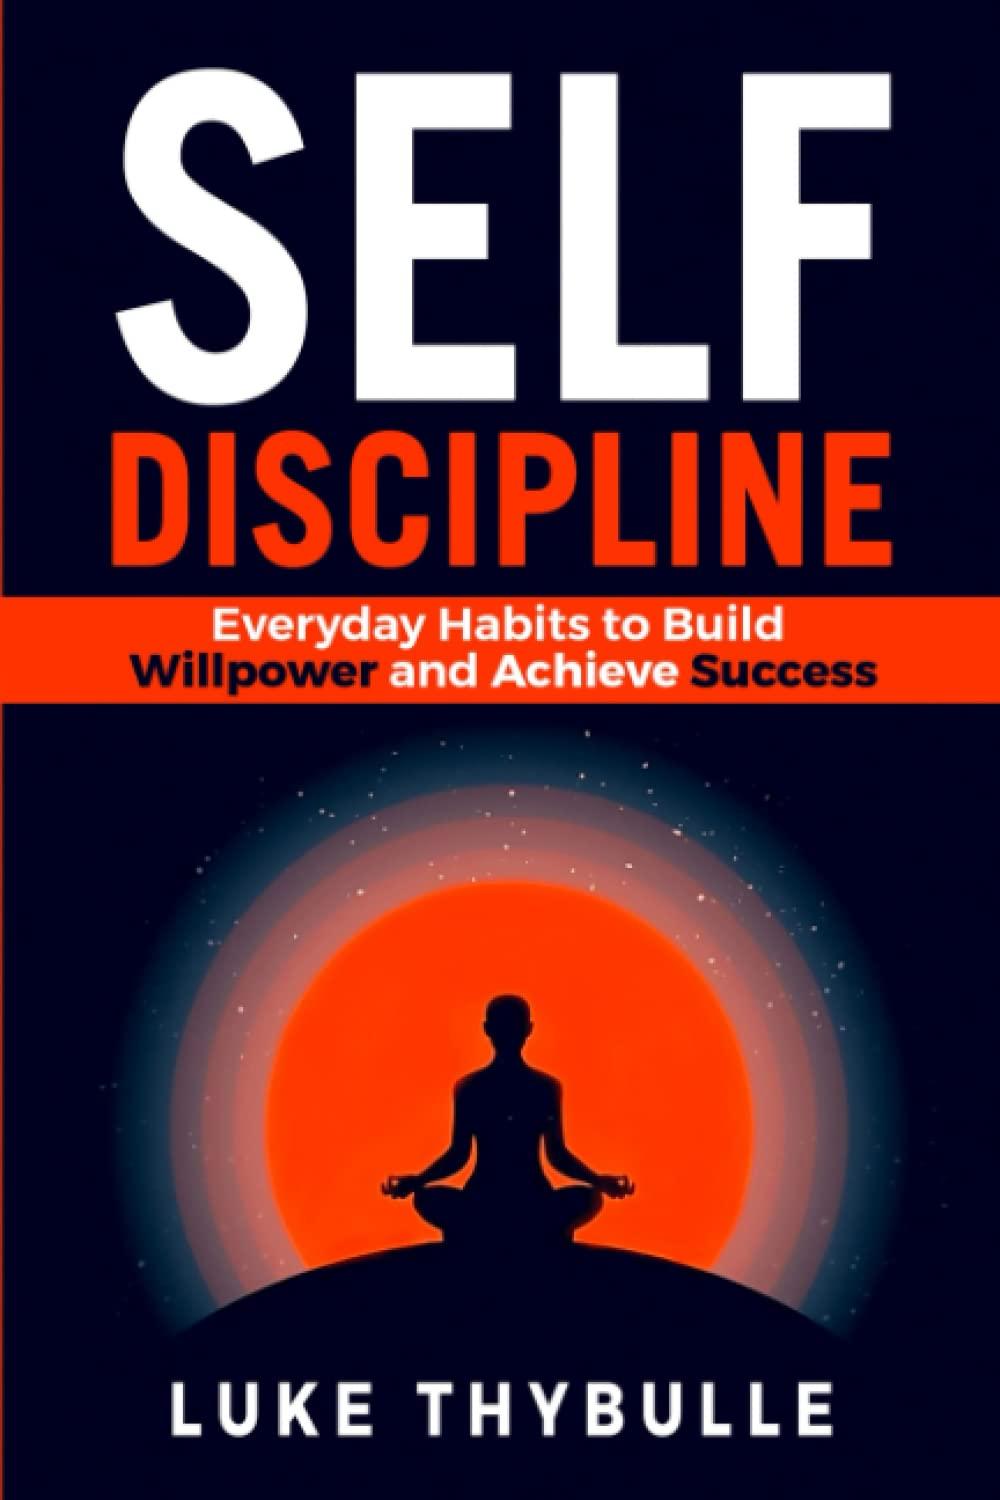 Self-Discipline Everyday Habits To Build Willpower And Achieve Success